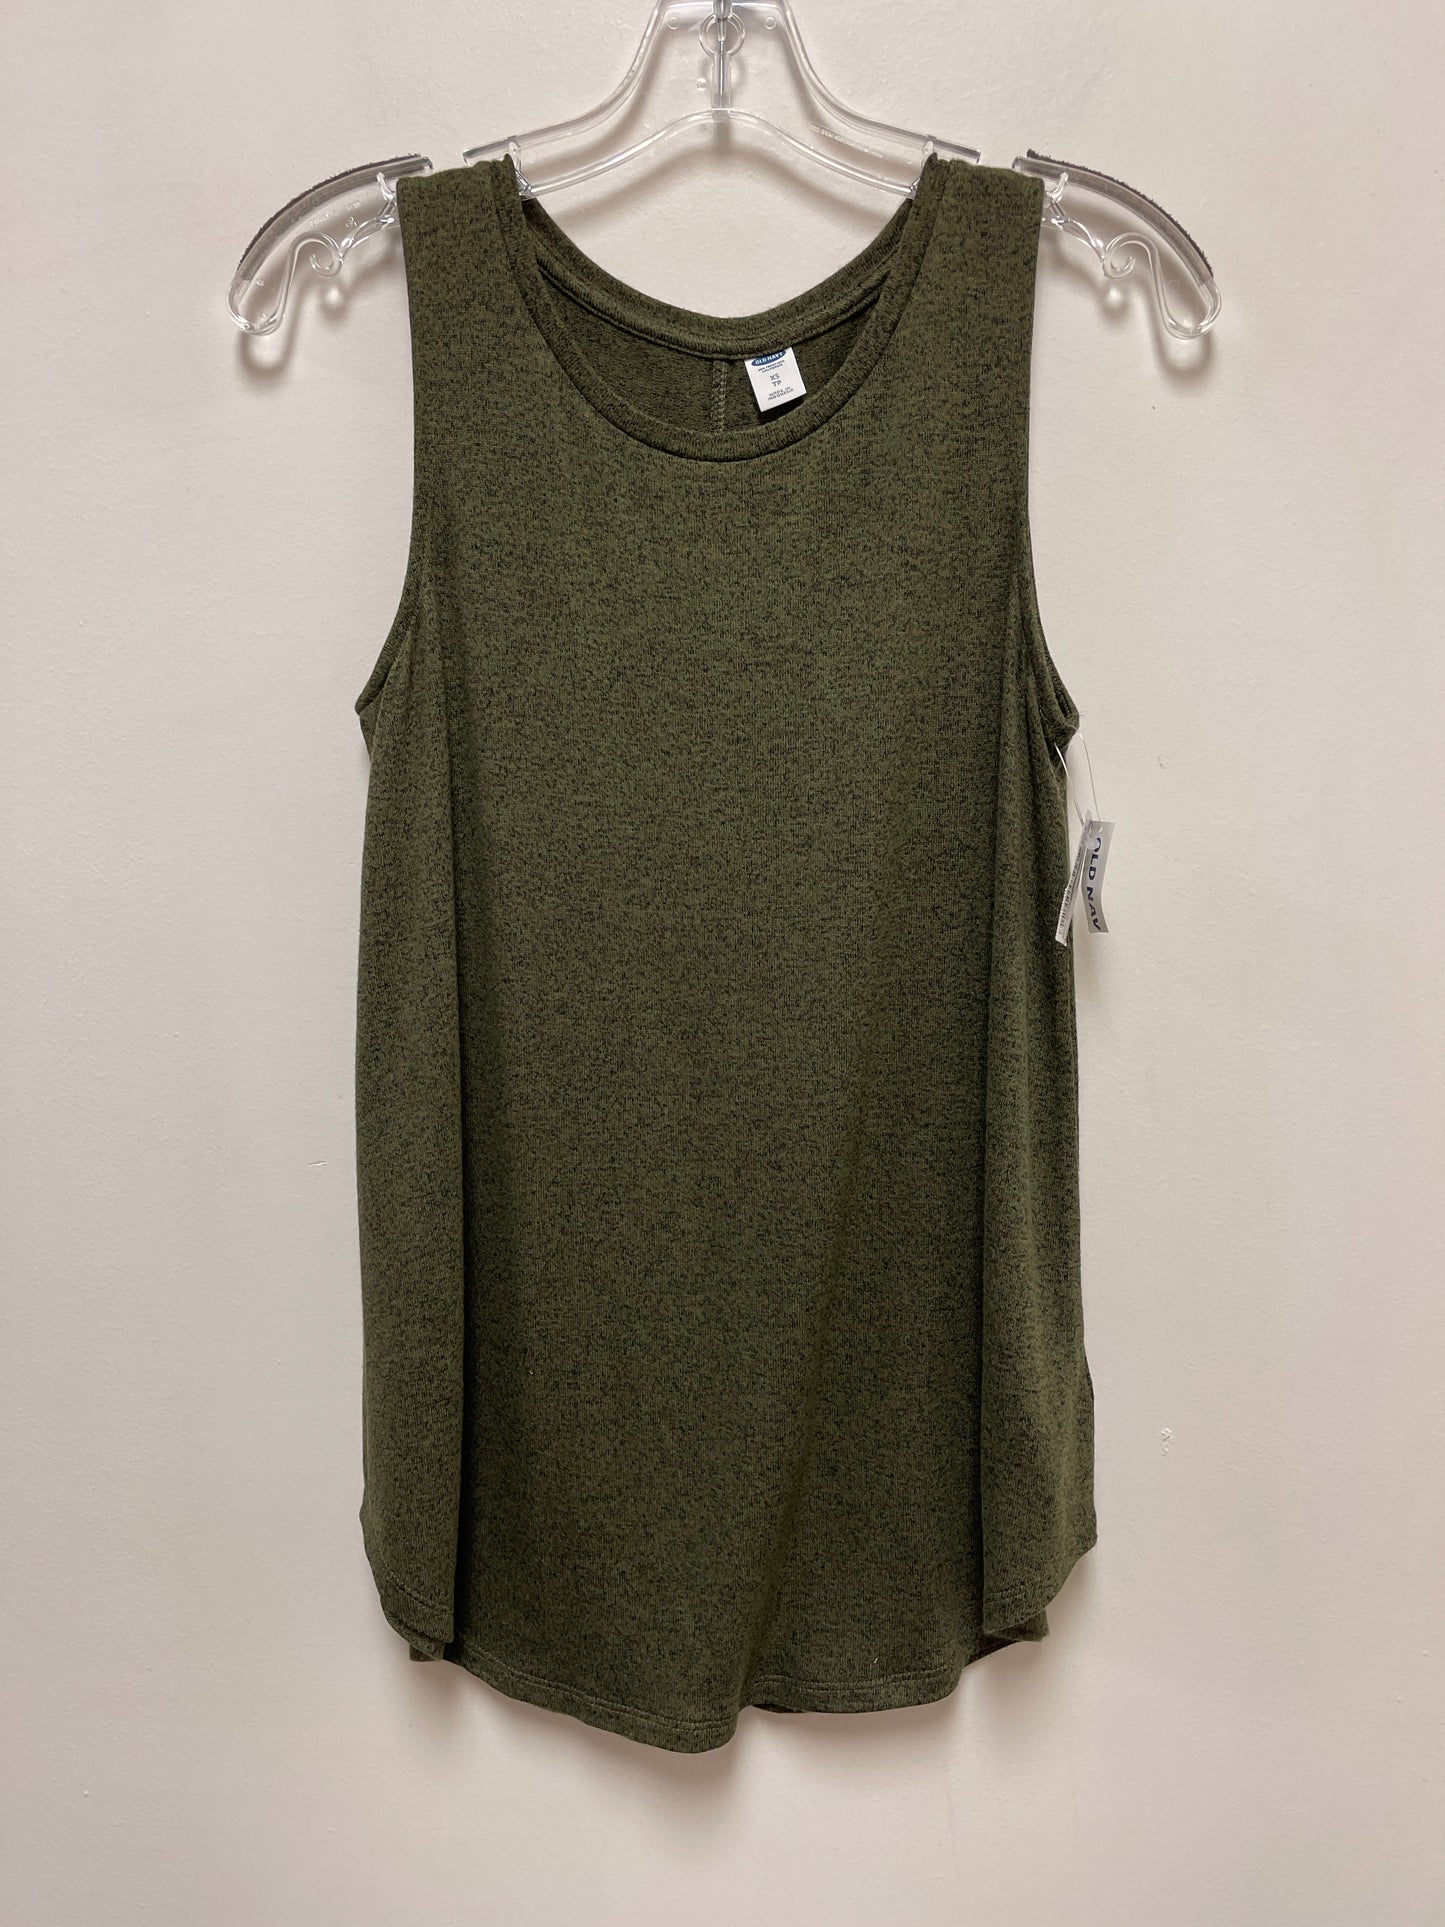 Green Top Sleeveless Old Navy, Size Xs